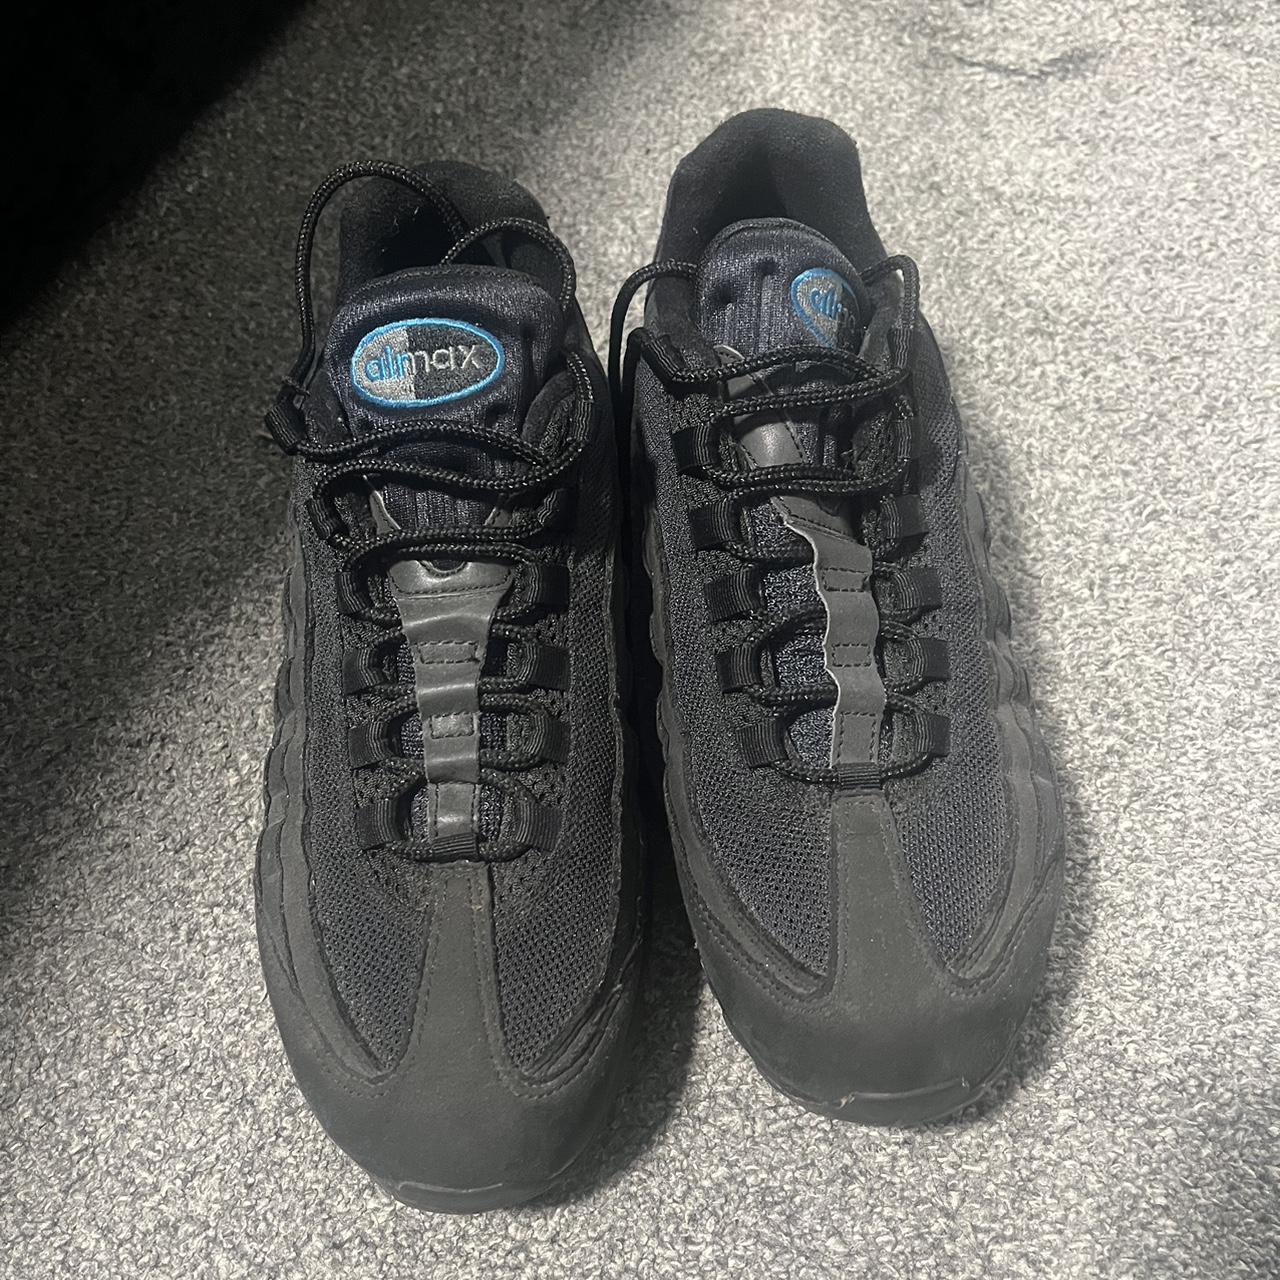 Nike air max 95 (110s) Men’s size 8 and, as seen in... - Depop